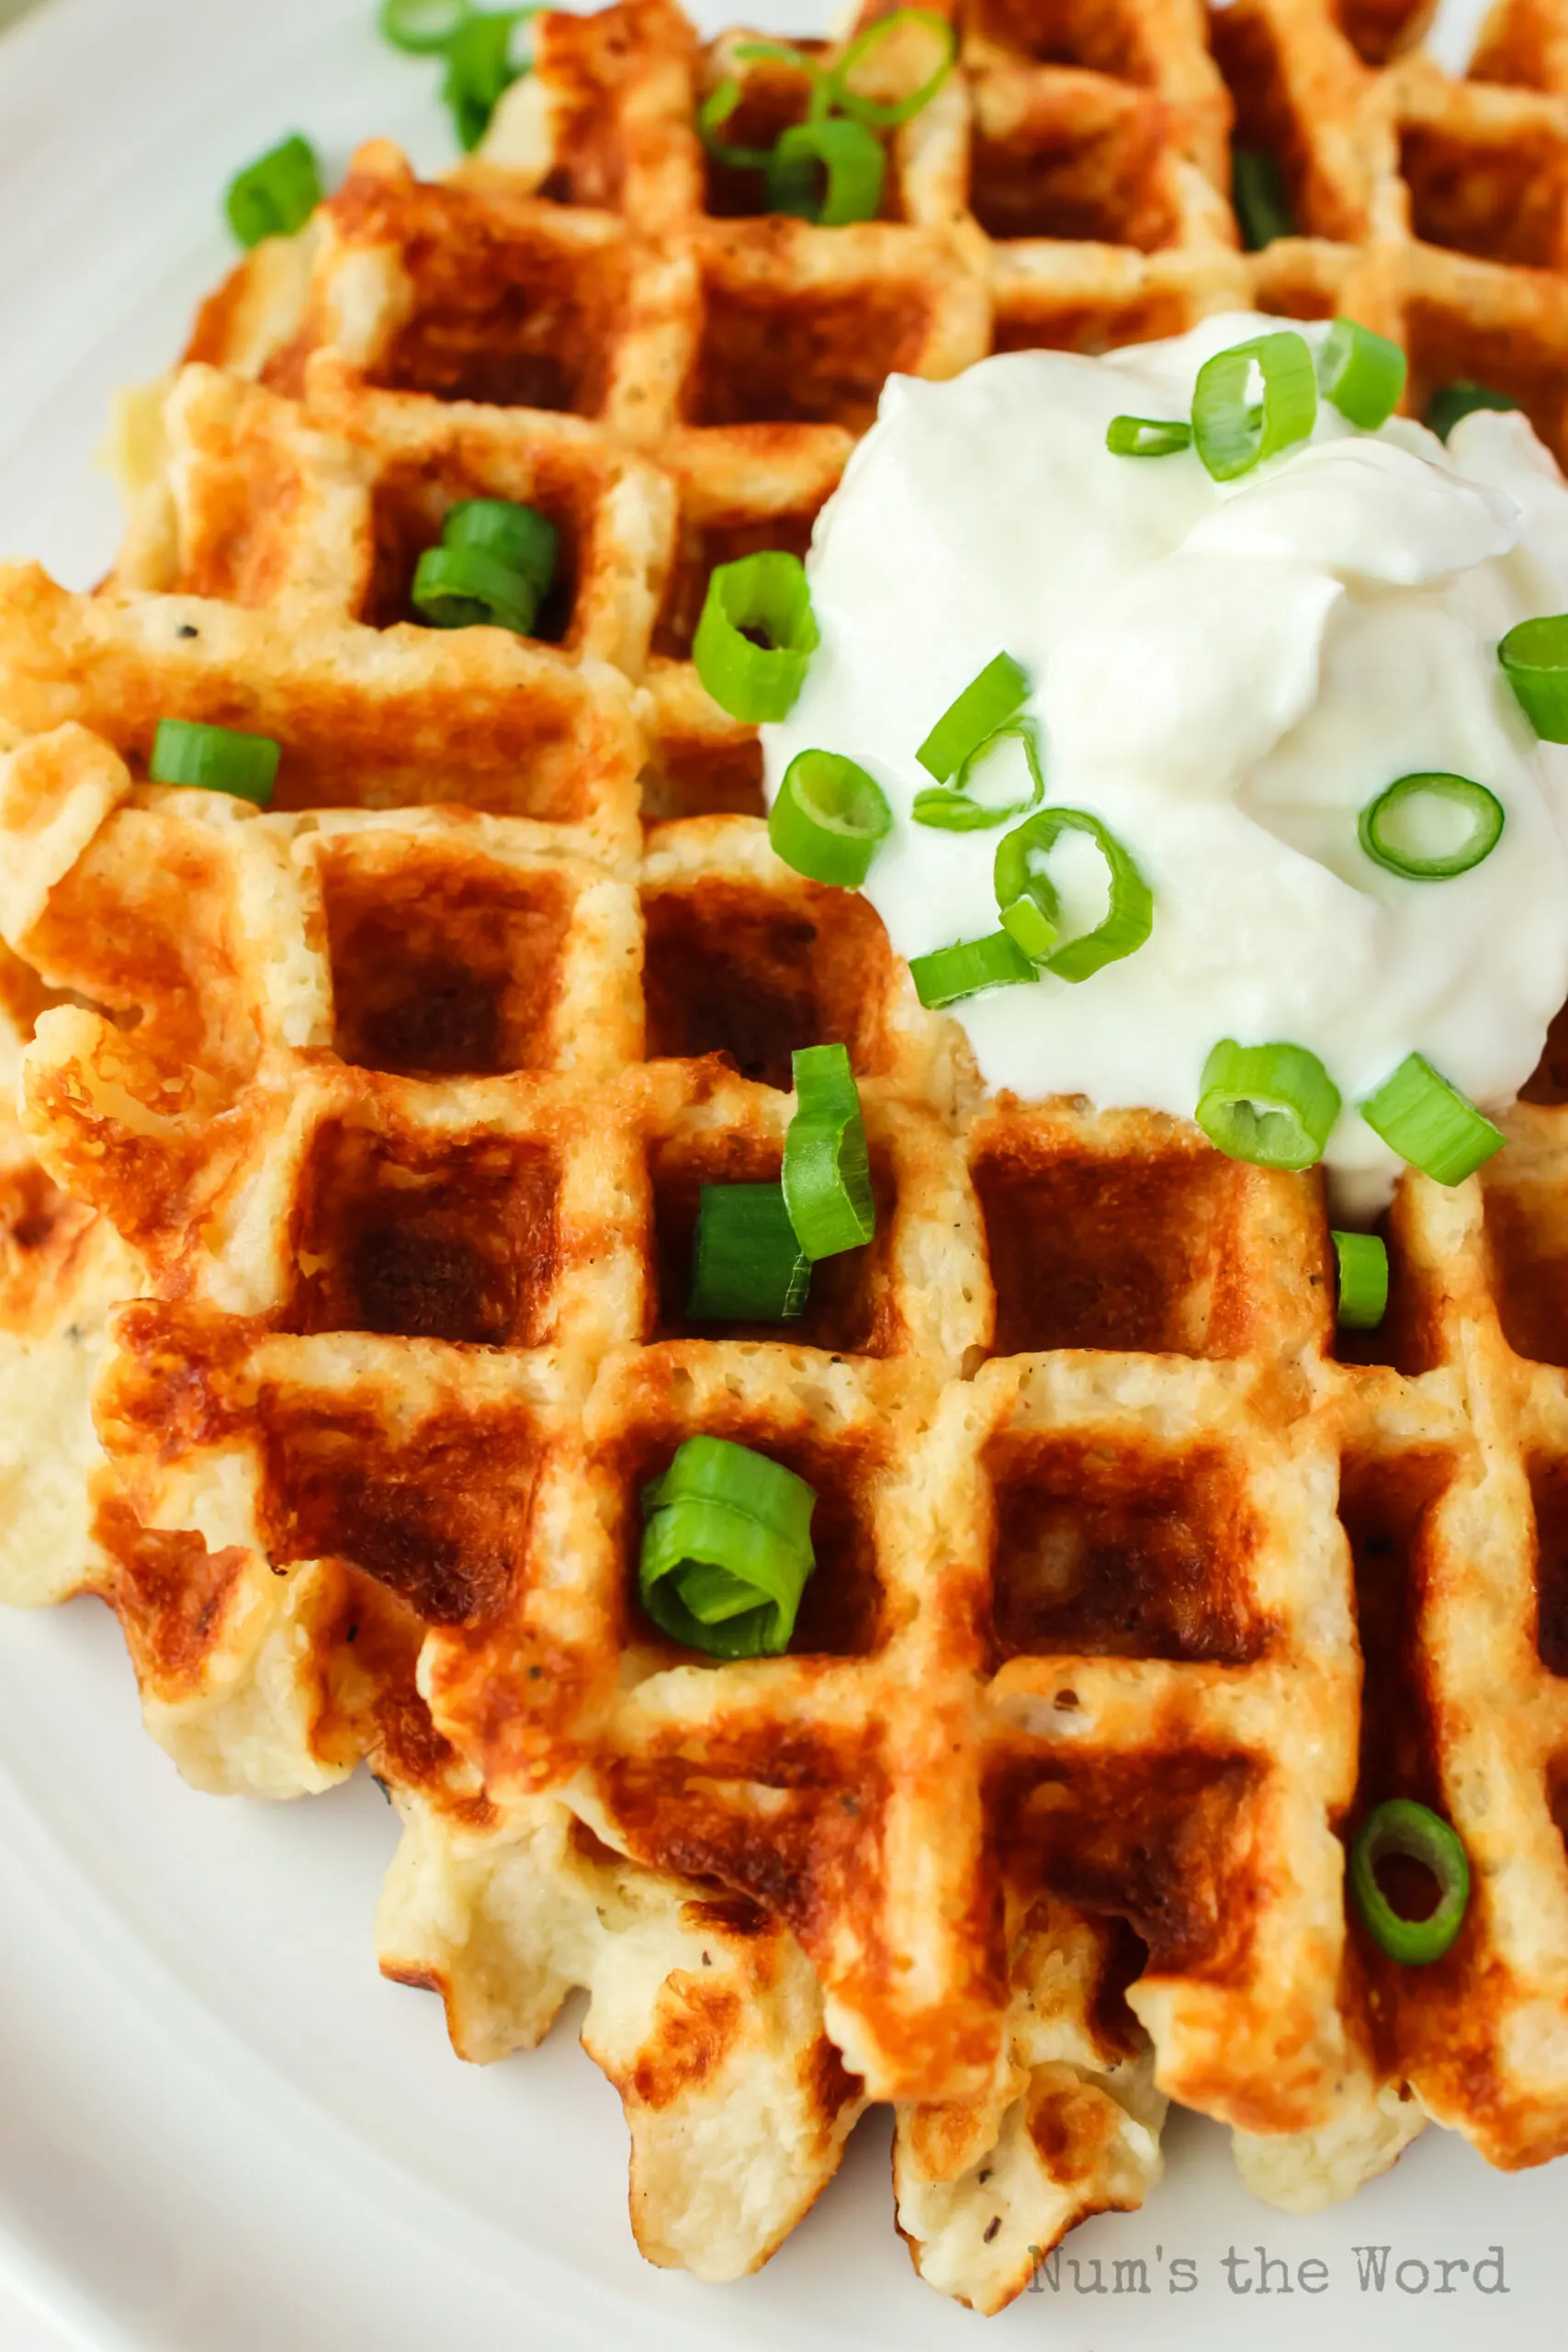 zoomed in image of potato waffles on plate